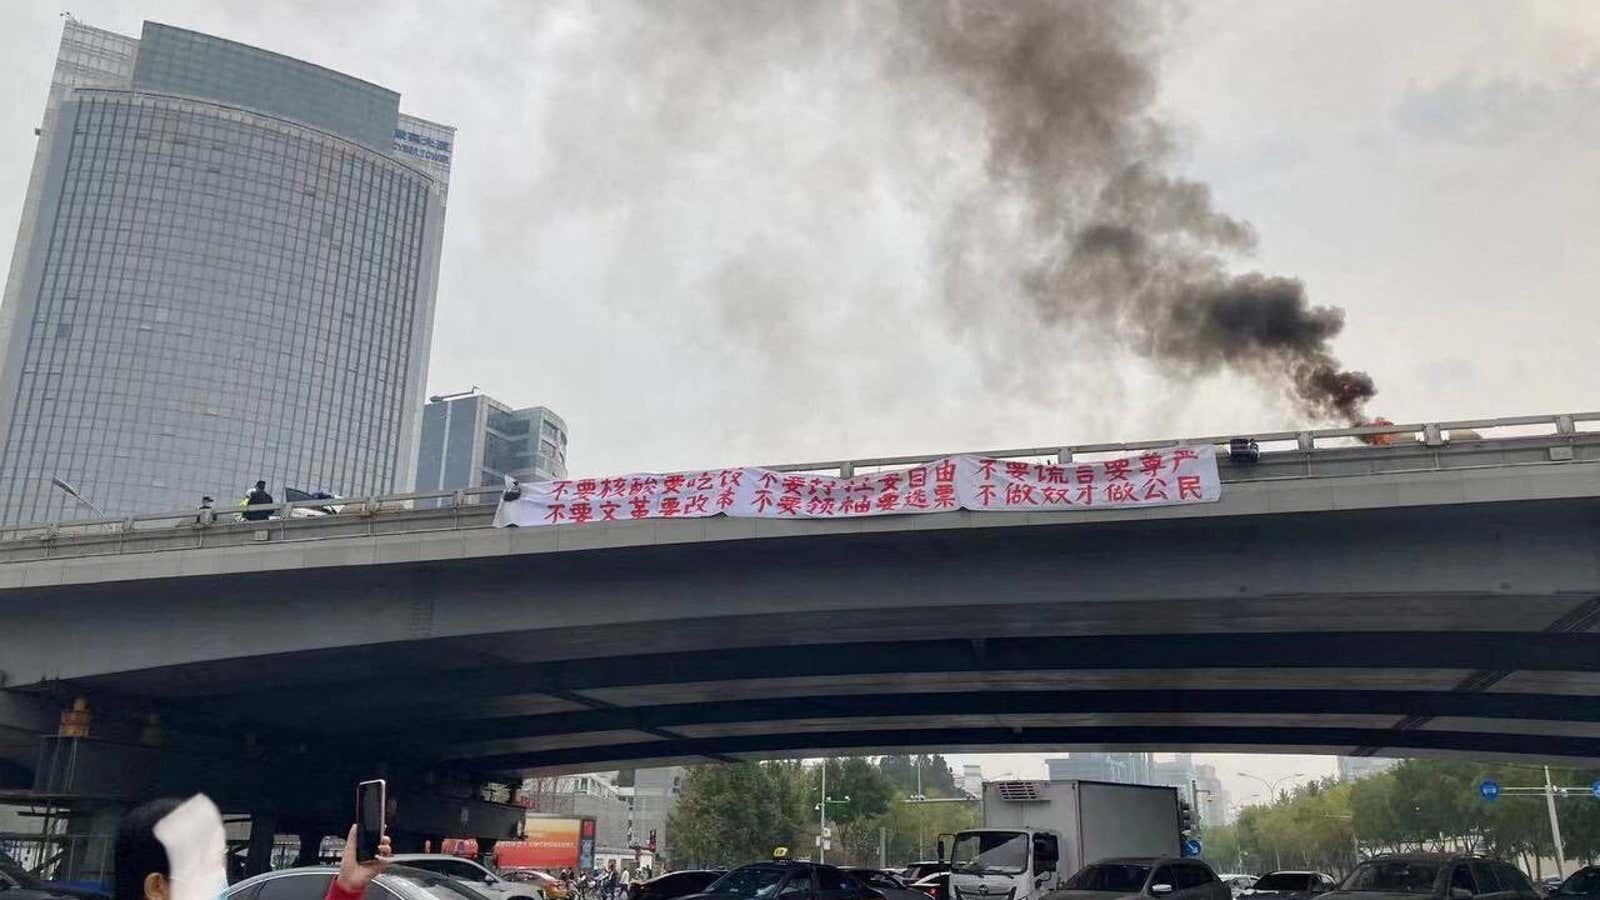 Smoke rises above a banner with a protest message that hangs off Sitong Bridge, Beijing, China on October 13, 2022.
